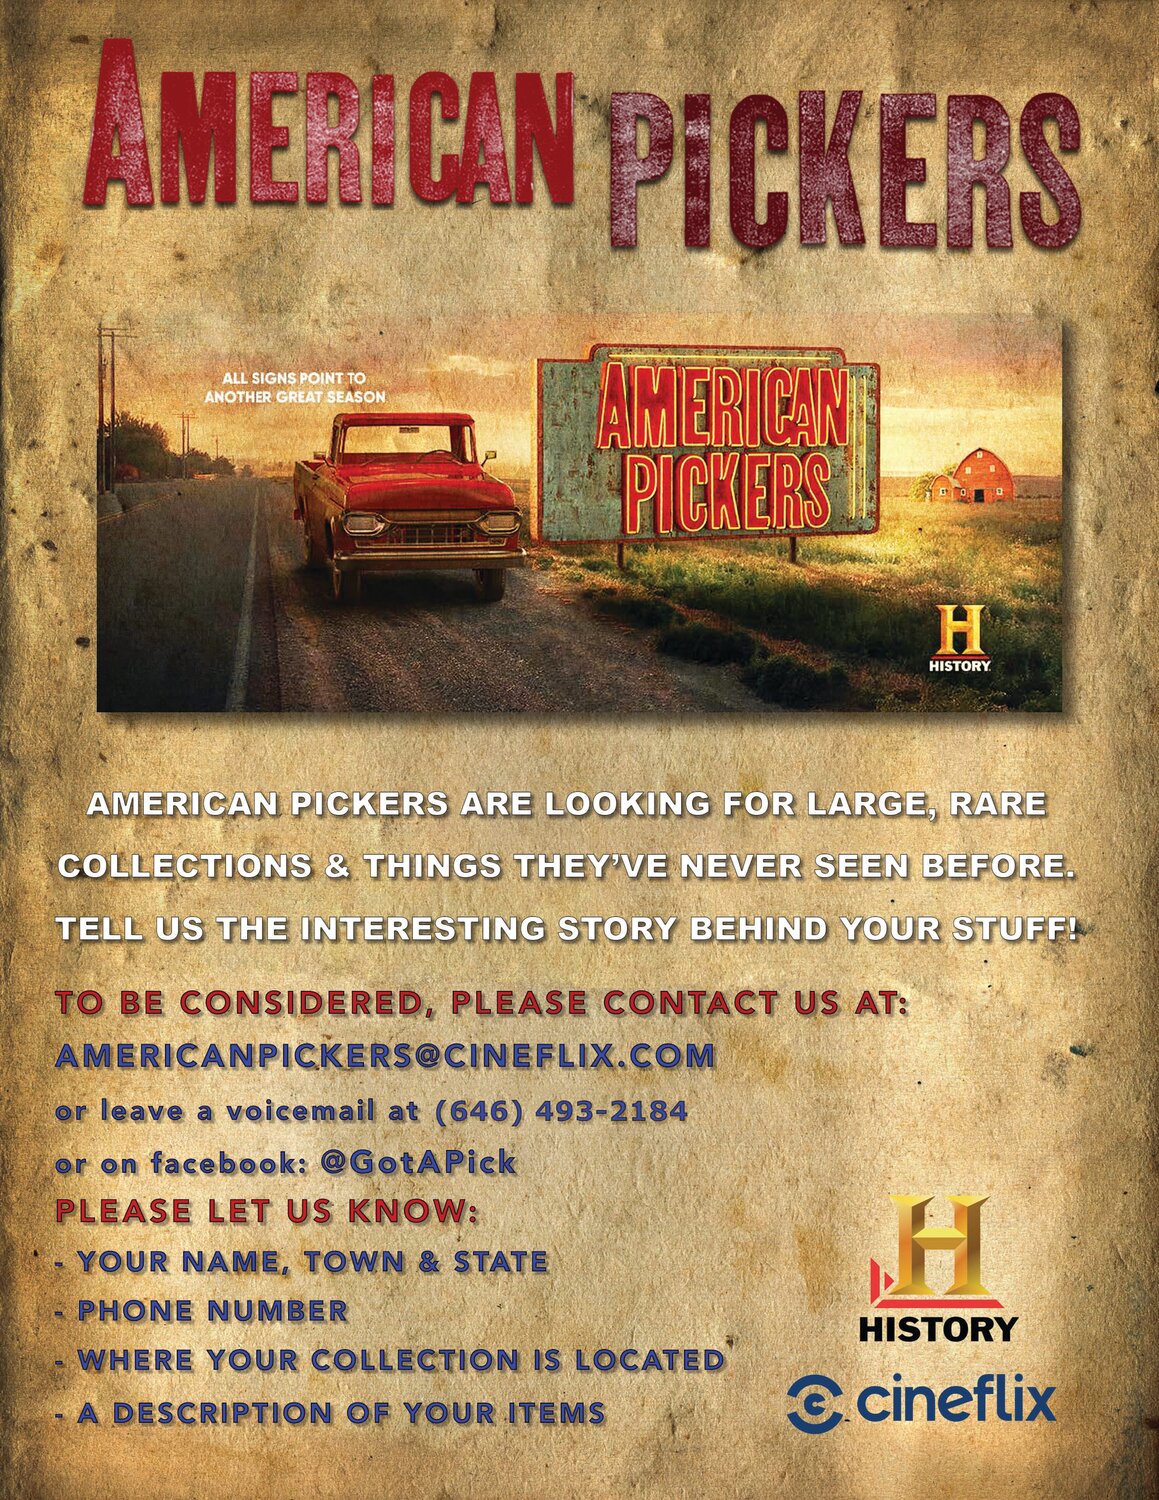 PICK ME, PICK ME: If you’re a Rhode Islander interested in getting picked, send them “your name, phone number, location, and description of the collection with photos to: americanpickers@cineflix.com” or call 646-493-2184 (or via Facebook @GotAPick).